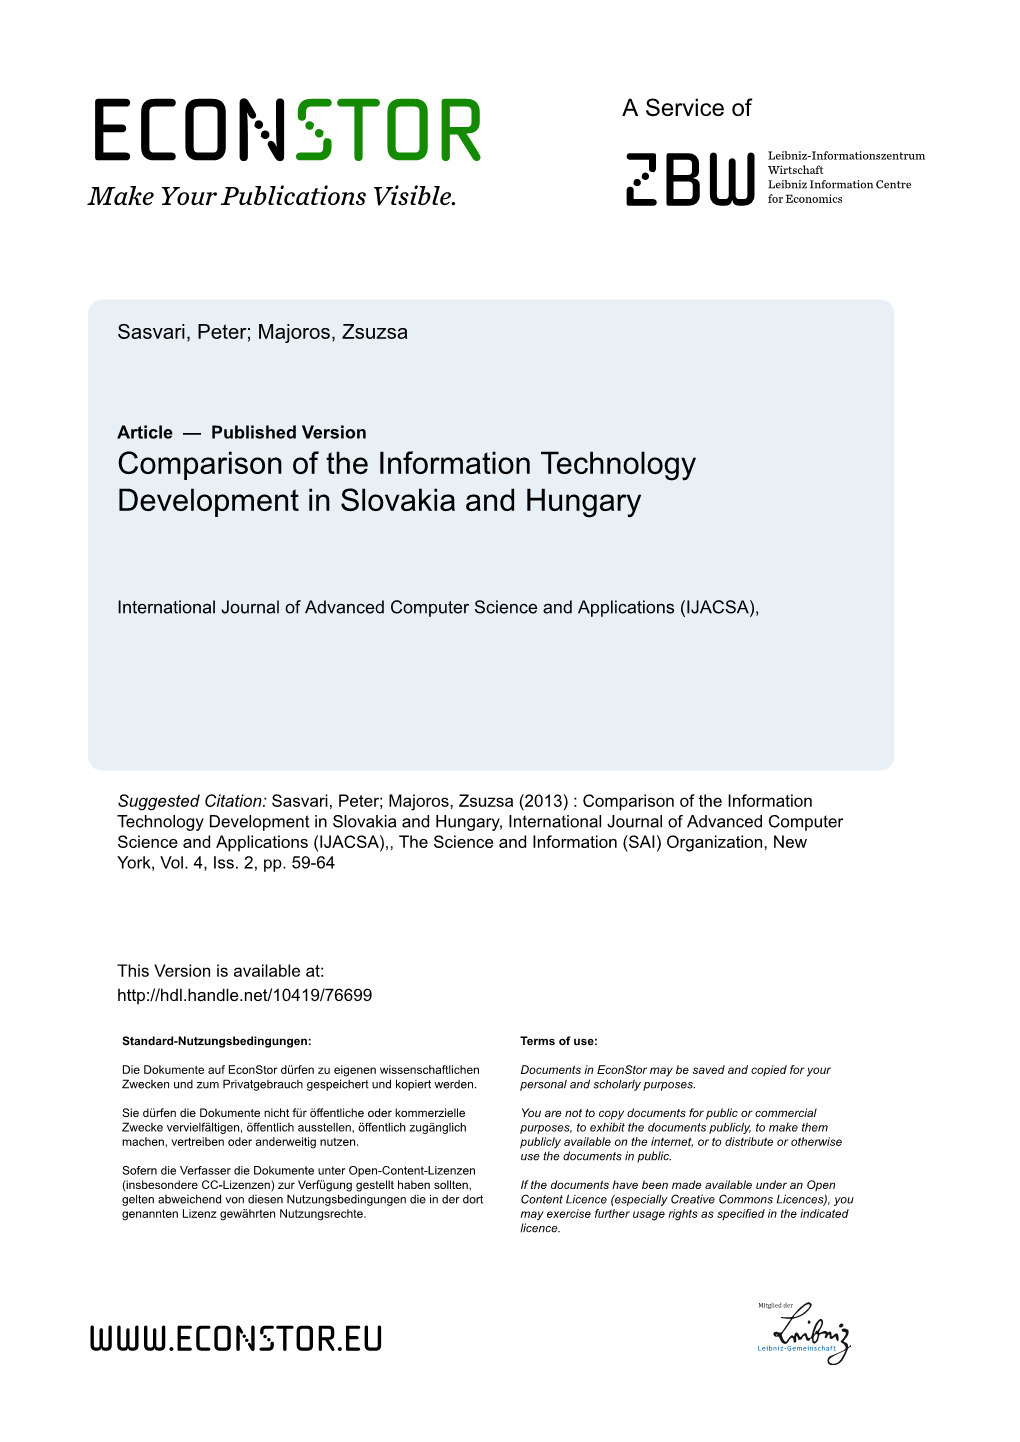 Comparison of the Information Technology Development in Slovakia and Hungary